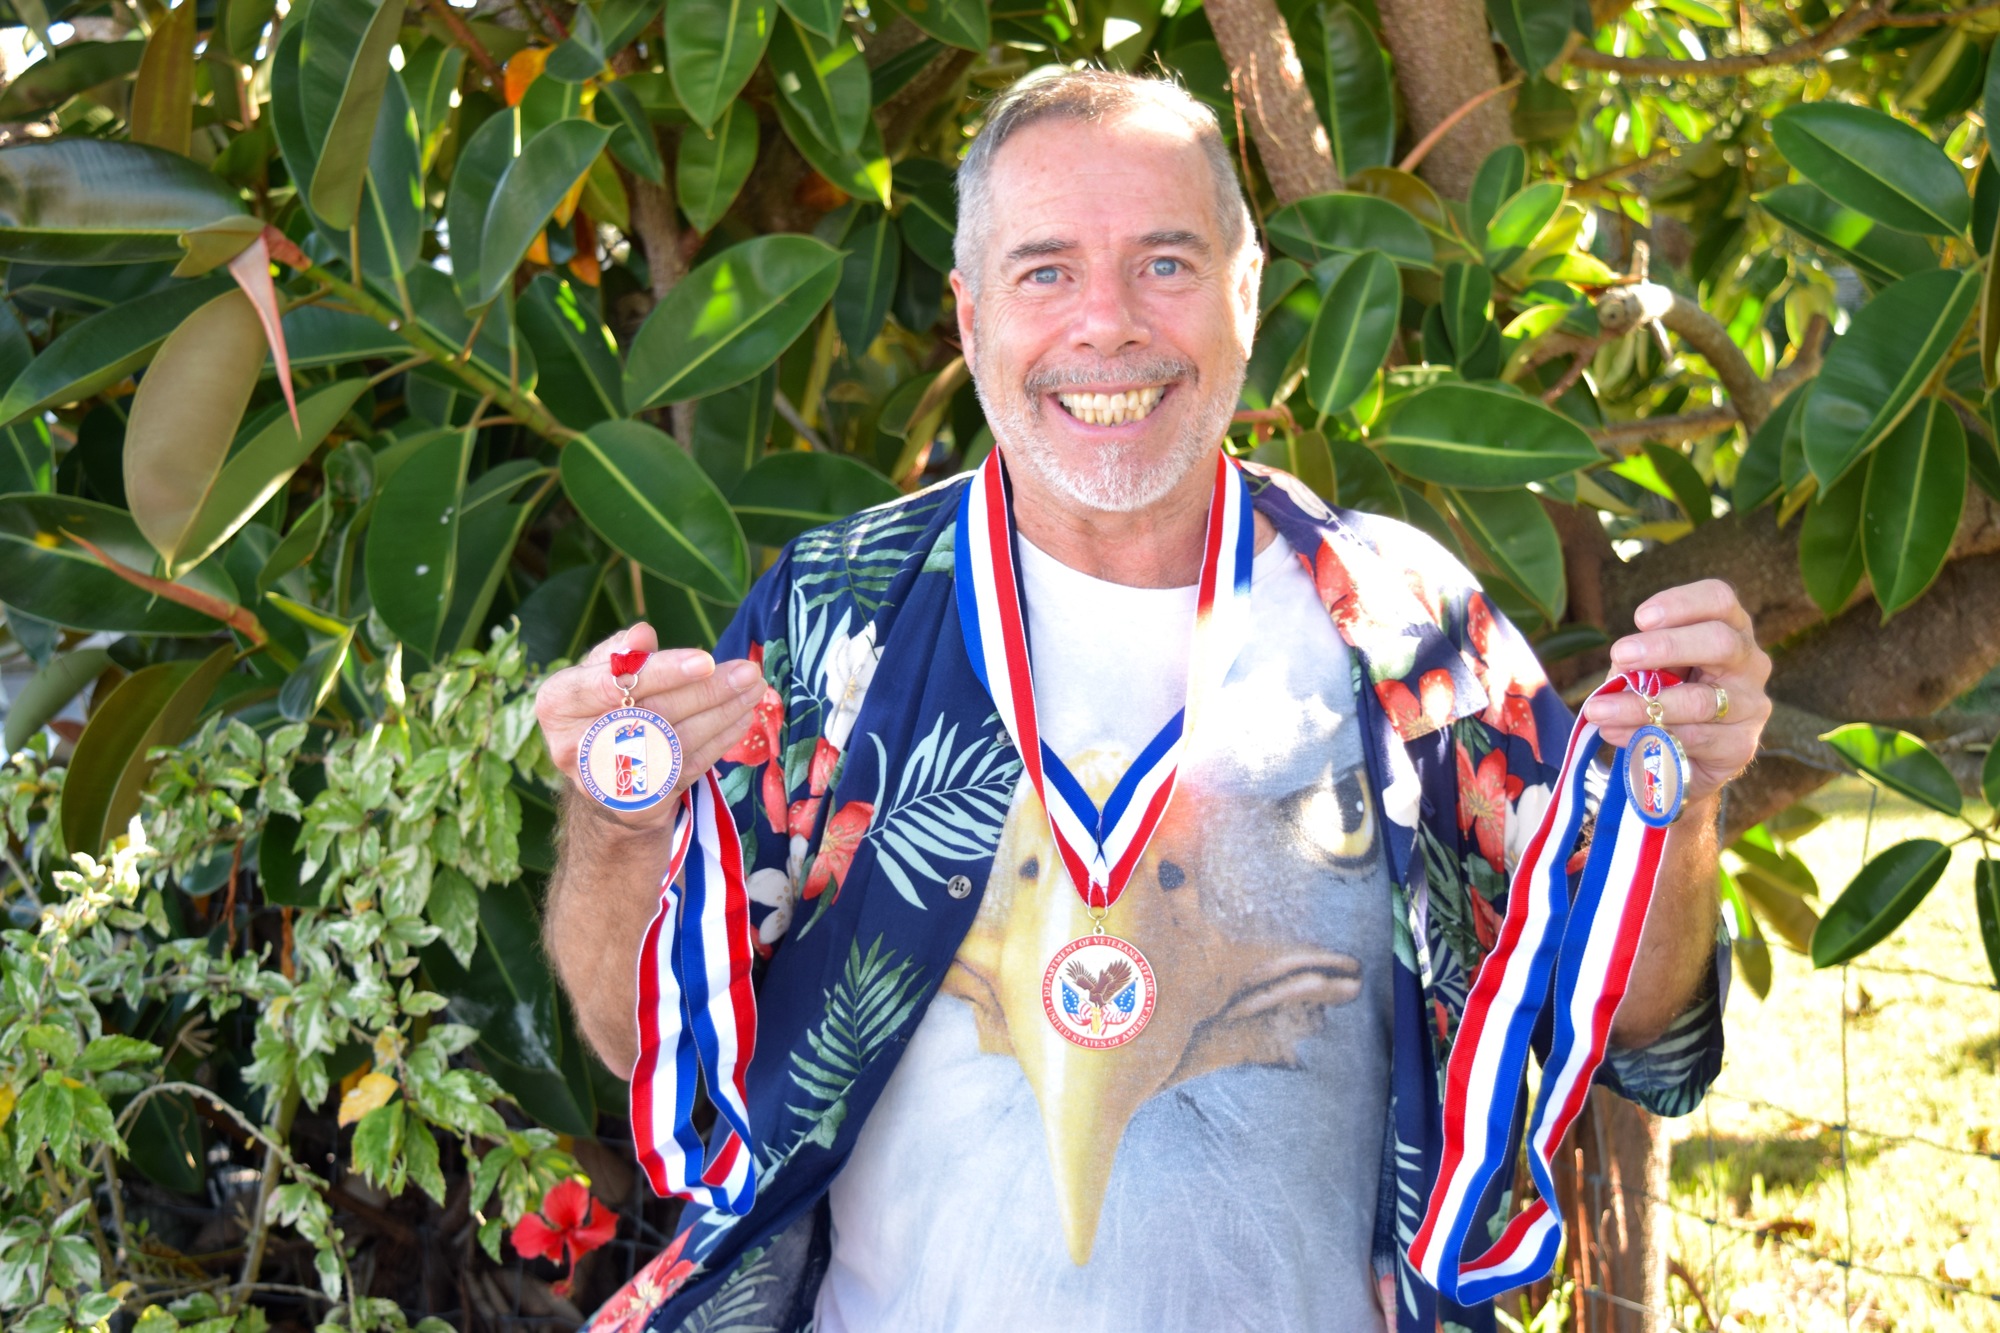 Ernie Windhauser, a U.S. Marine Corps veteran, proudly holds the medals he earned for his drama and flag-dance performances.